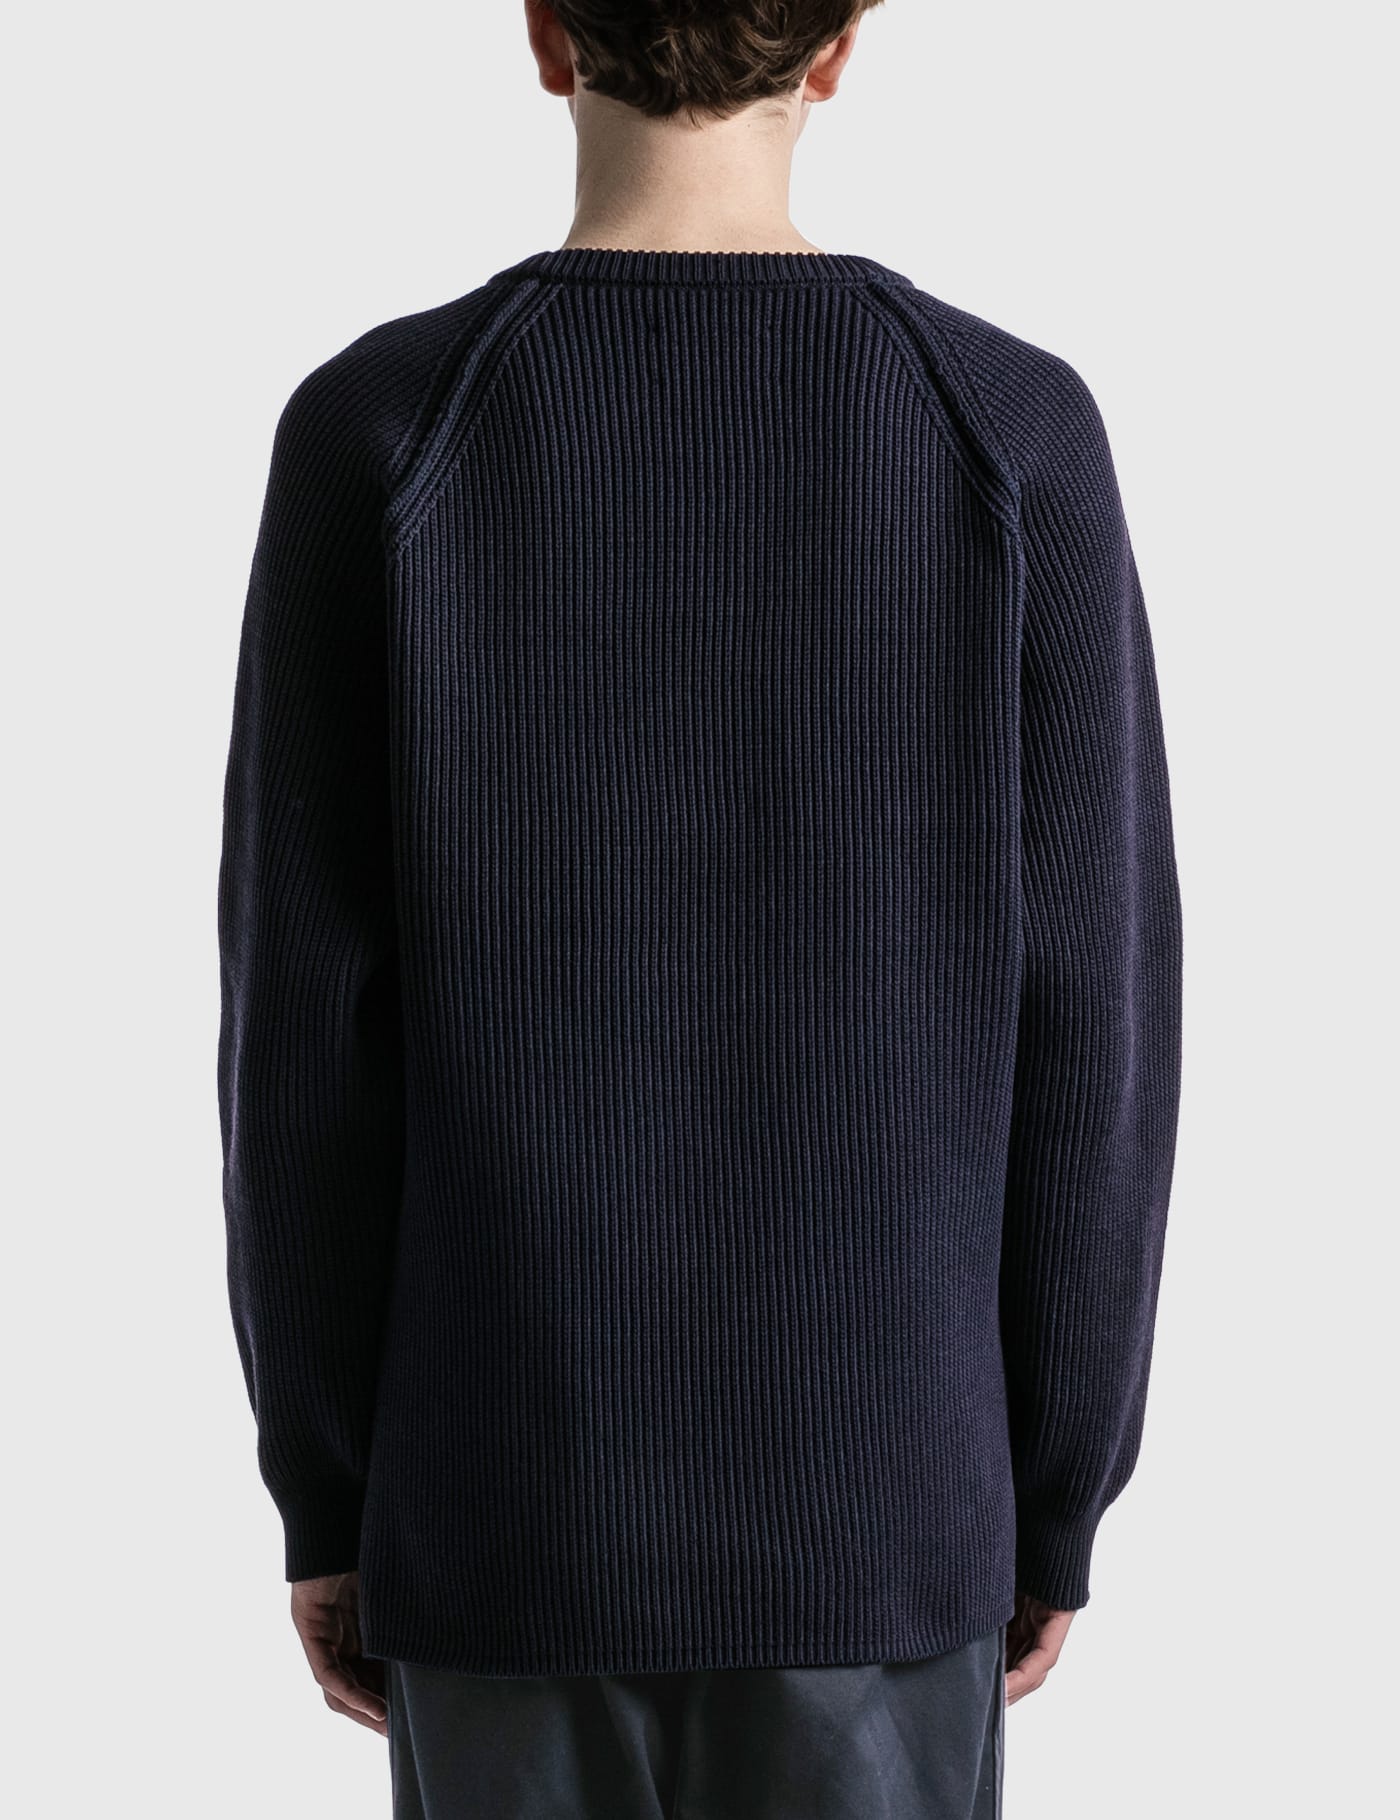 Nanamica - 5G Crewneck Sweater | HBX - Globally Curated Fashion and  Lifestyle by Hypebeast